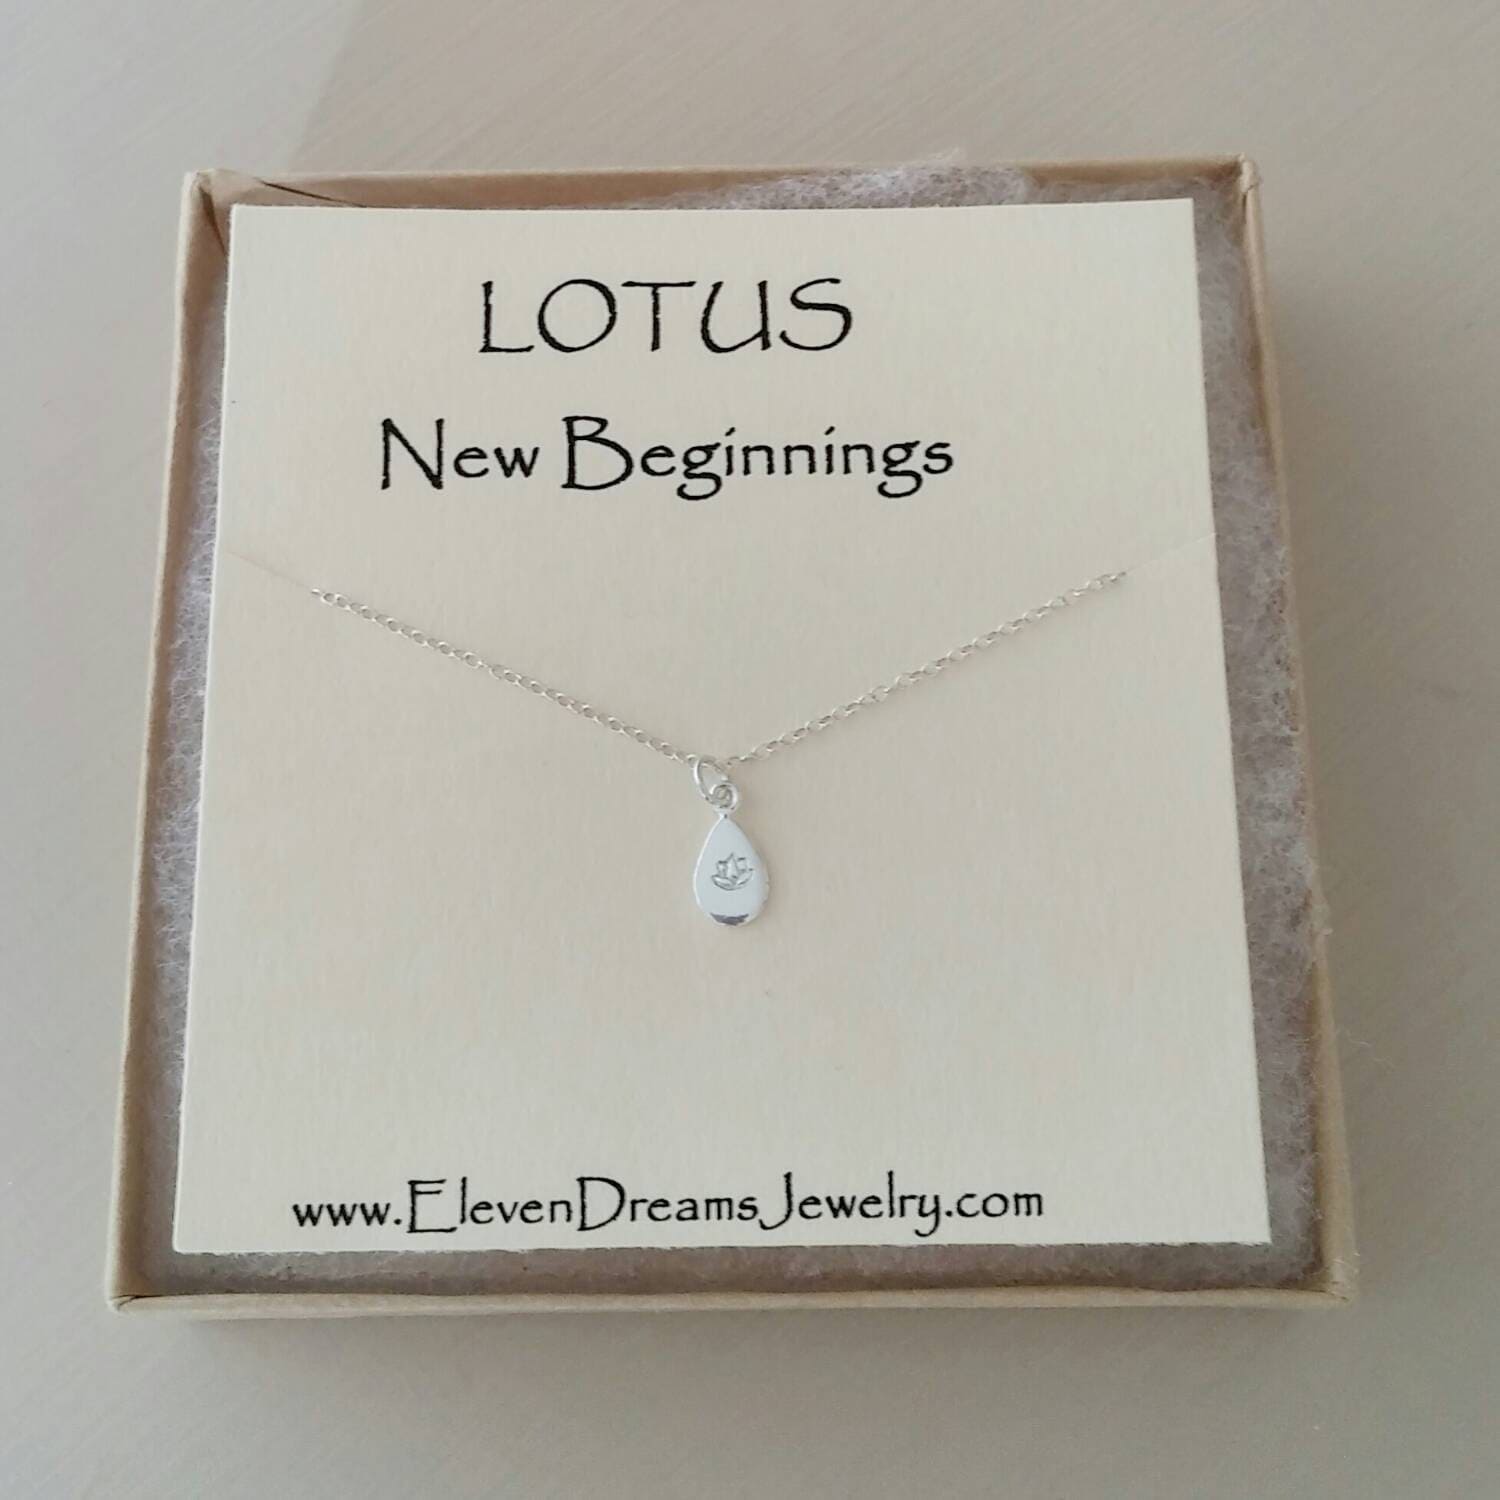 Silver Lotus Charm Necklace. Hand stamped. New Beginnings. | Etsy